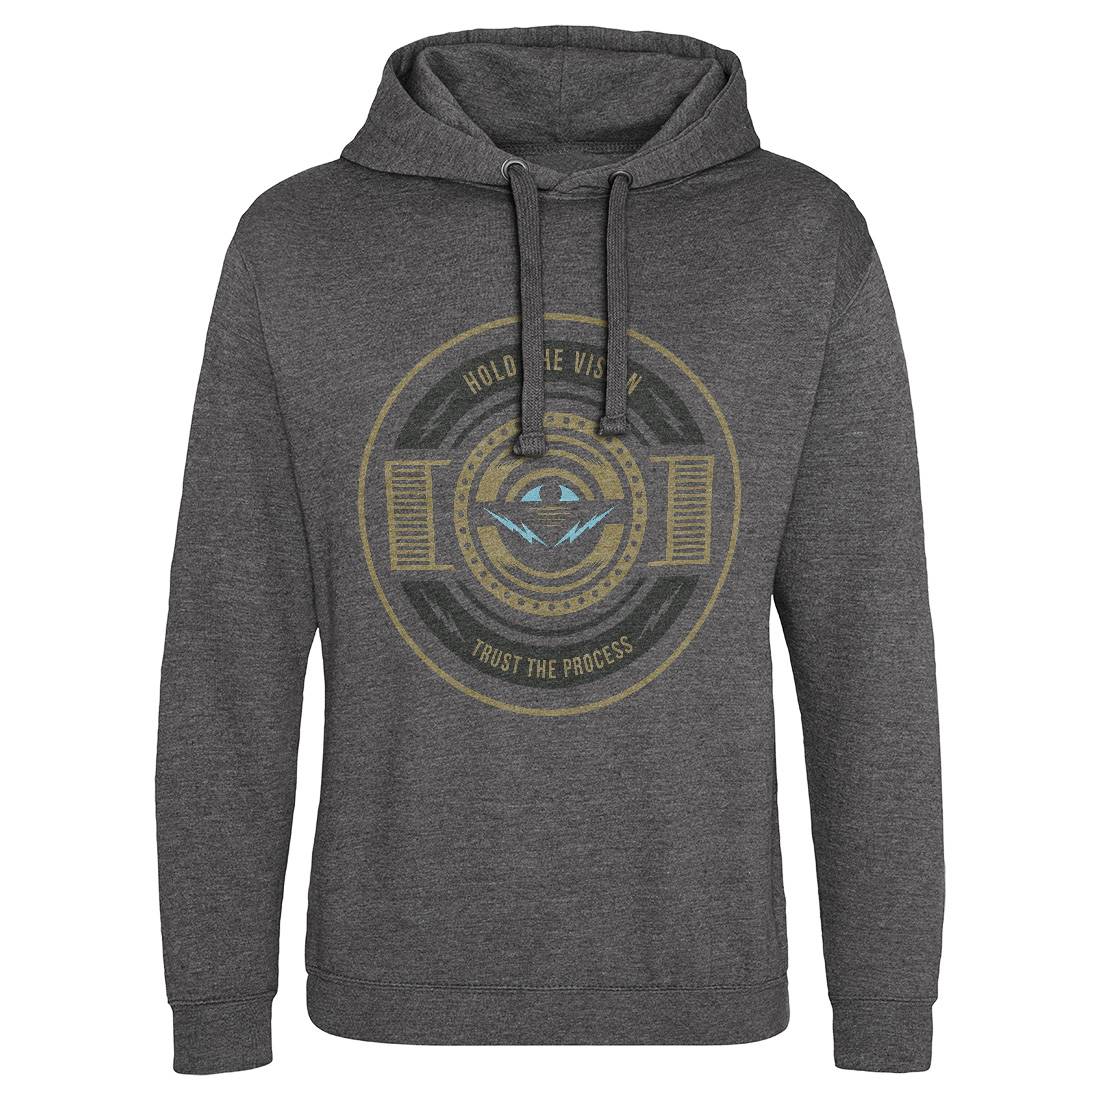 Hold The Vision Mens Hoodie Without Pocket Illuminati A331